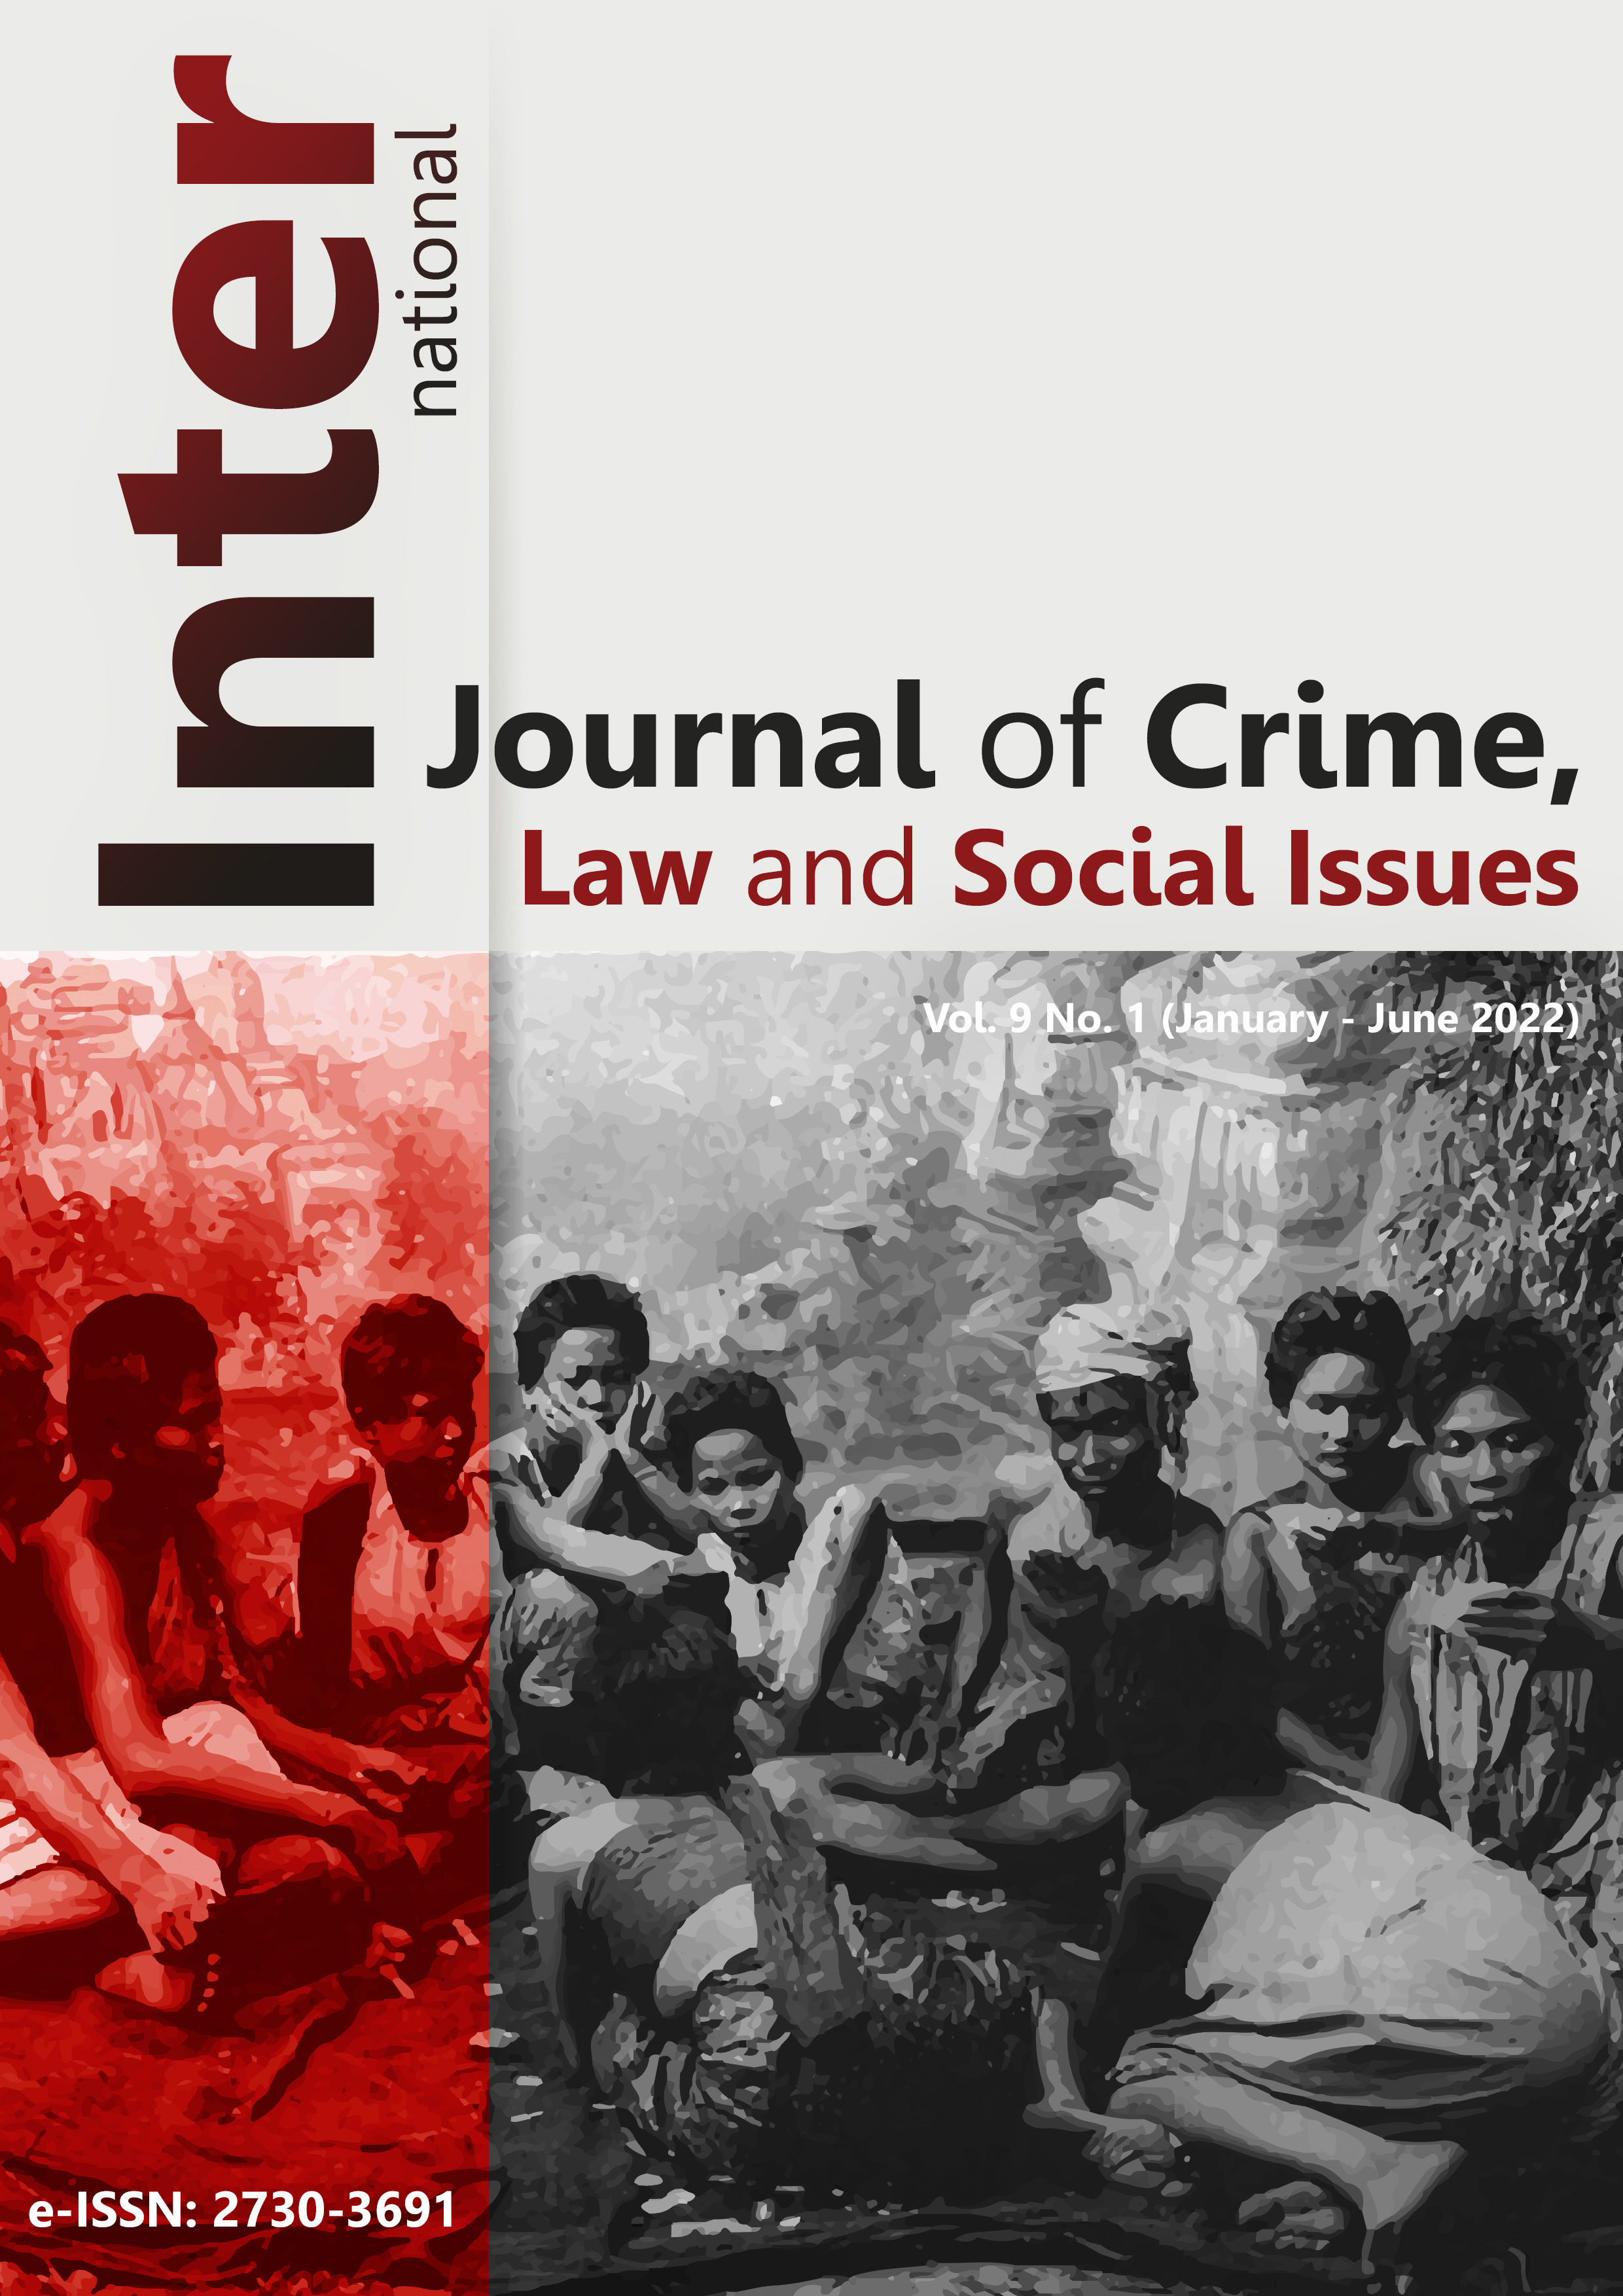 					View Vol. 9 No. 1 (2022): International Journal of Crime, Law and Social Issues
				